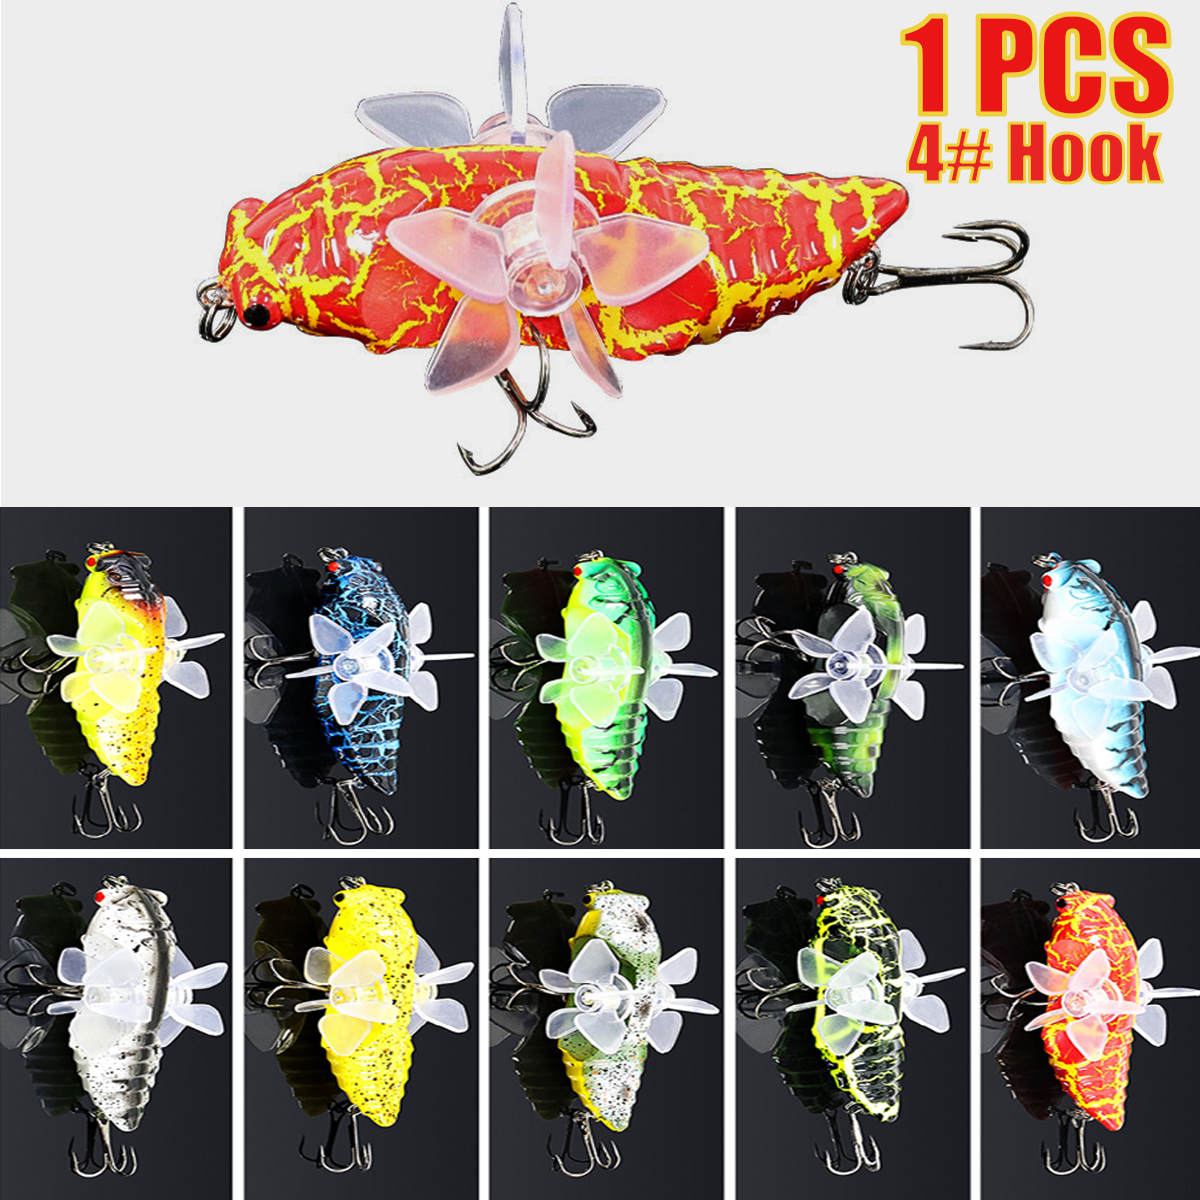 ZANLURE-1PSC-75cm-Artificial-Bait-Fishing-Lure-Insect-Rotating-Wings-Swimbait-Fishing-Hook-1611032-1